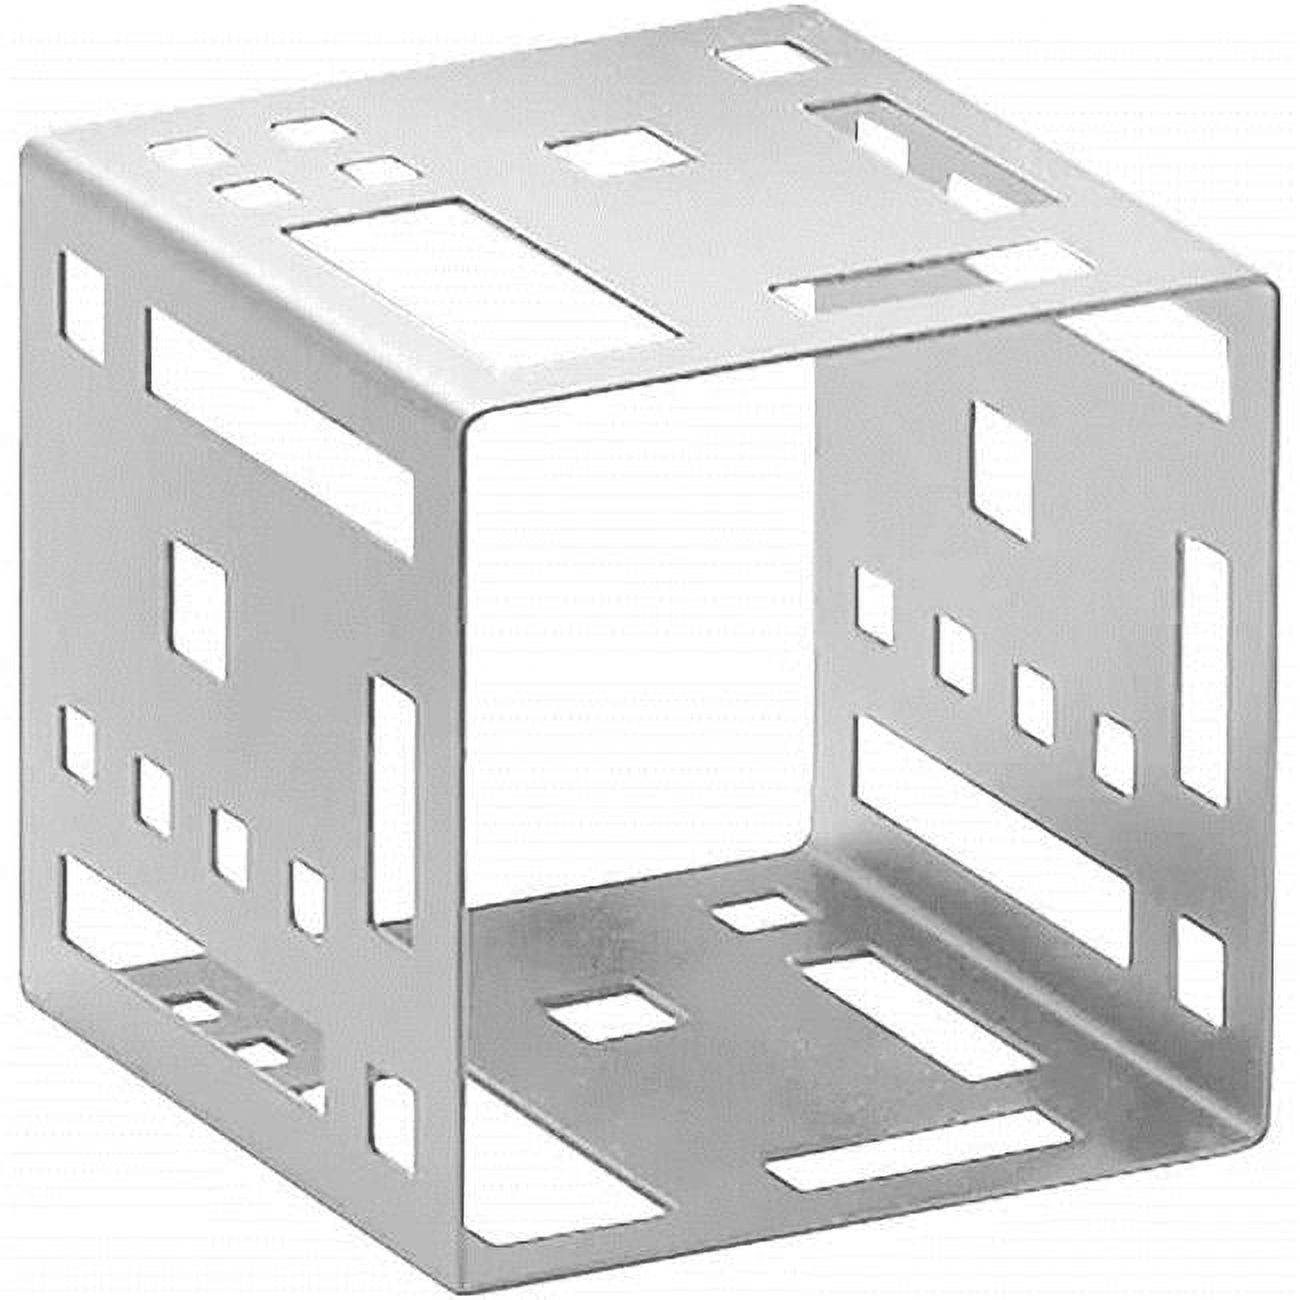 1607-7-55 Squared Stainless Steel Cube Riser - 7 X 7 X 7 In.